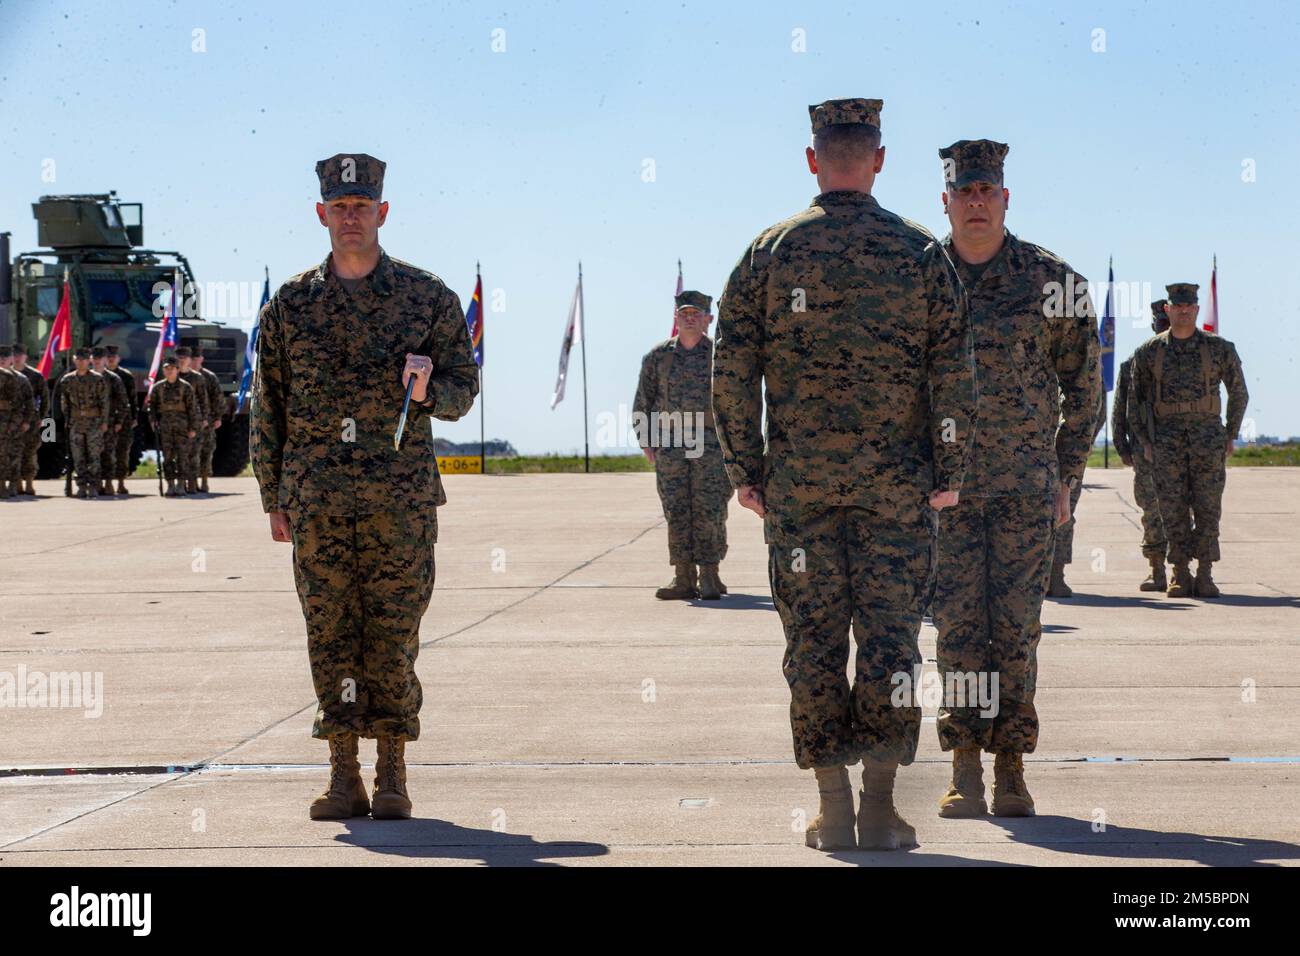 U.S. Marine Corps Col. Jeremy S. Winters, center, commanding officer of Marine Air Control Group (MACG) 38, 3rd Marine Aircraft Wing, Sgt. Maj. Allen B. Goodyear, left, outgoing sergeant major of MACG-38, and Sgt. Maj. Gerardo C. Ybarra, right, incoming sergeant major of MACG-38, prepare to exchange the noncommissioned officer sword during a relief and appointment ceremony on Marine Corps Air Station Miramar, California, Feb 24, 2022. A relief and appointment ceremony is a time-honored tradition, which formally signifies the transfer of responsibility and entails the total accountability and a Stock Photo